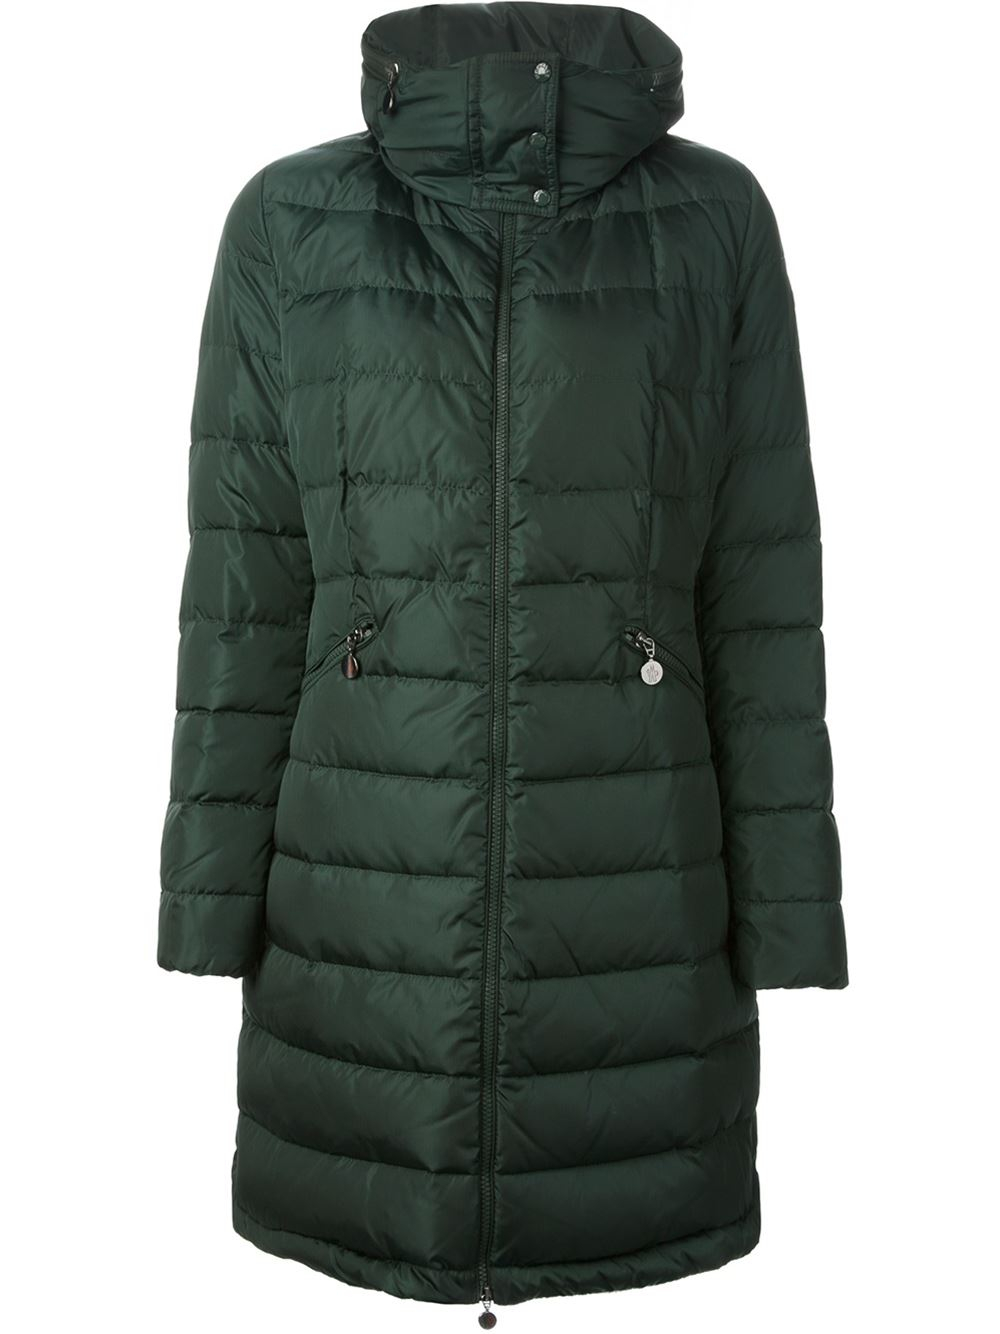 Moncler Charpal Padded Coat in Green - Lyst